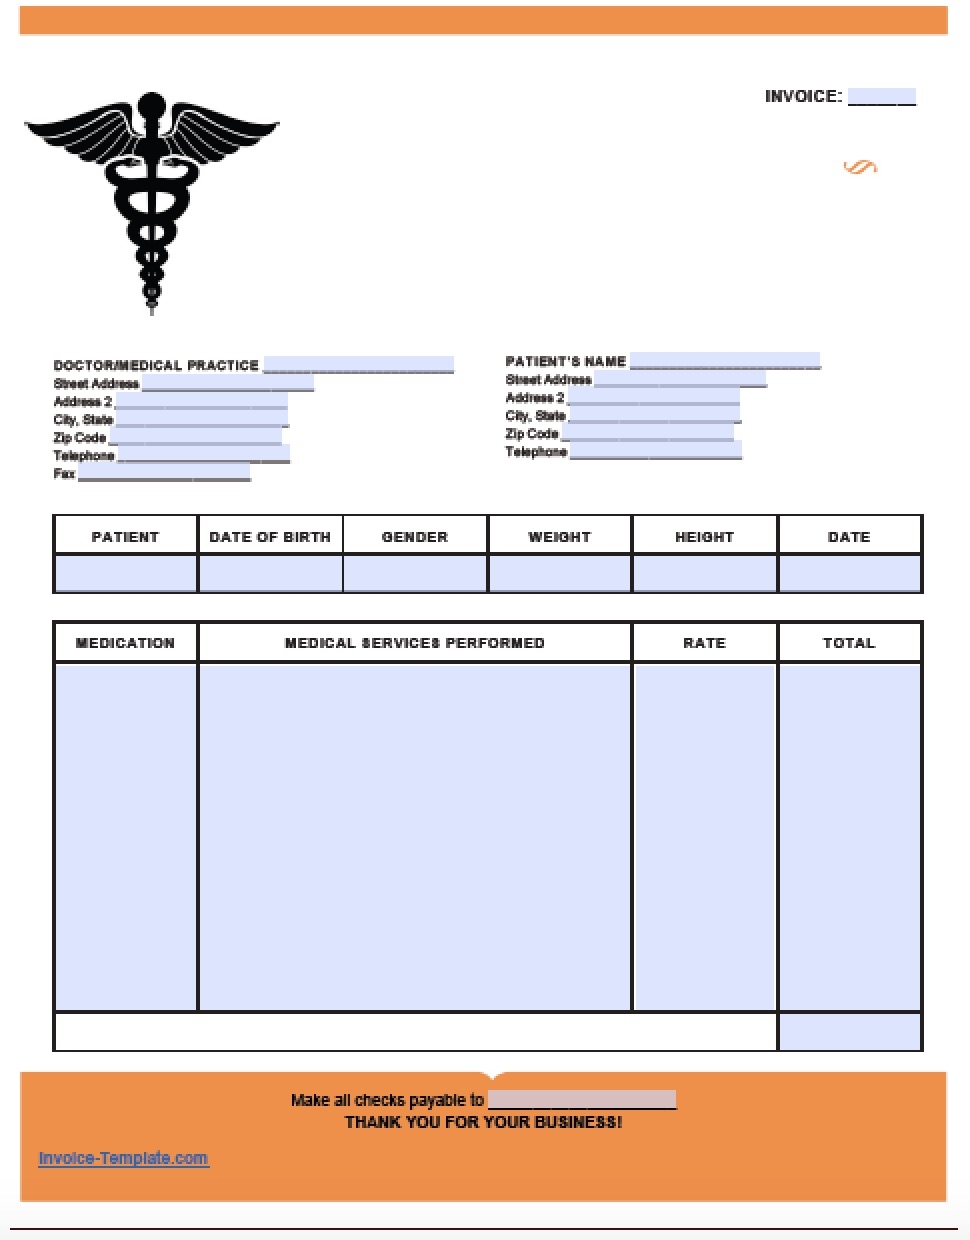 doctor invoice template free medical invoice template excel pdf word doc 970 X 1240